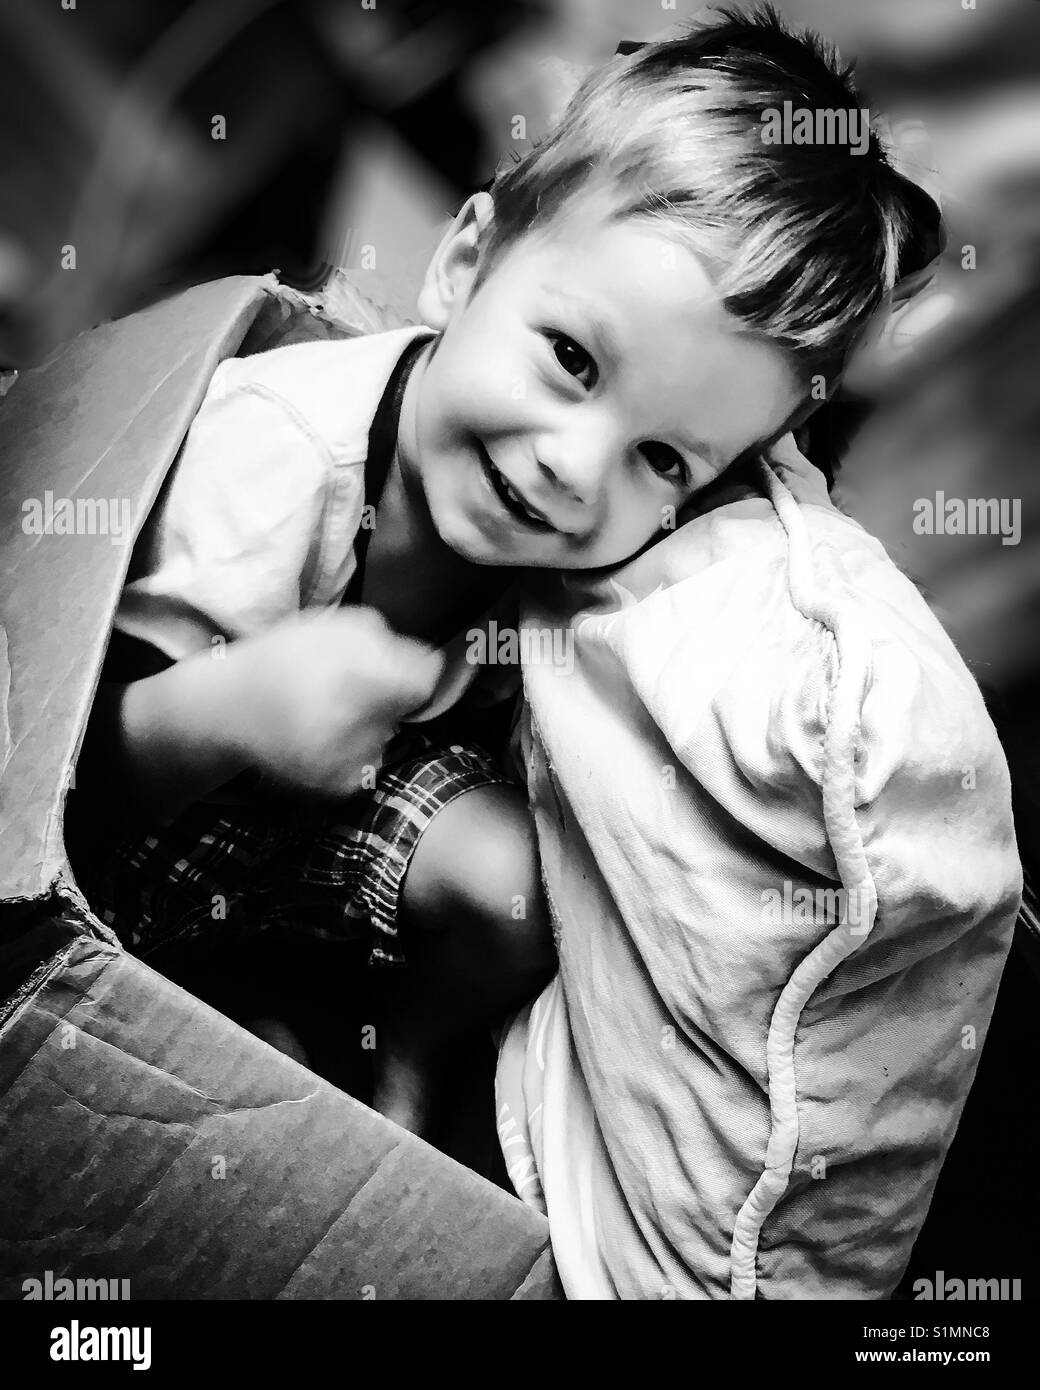 Smiling toddler sitting ina cardboard box along with his favorite pillow. Stock Photo